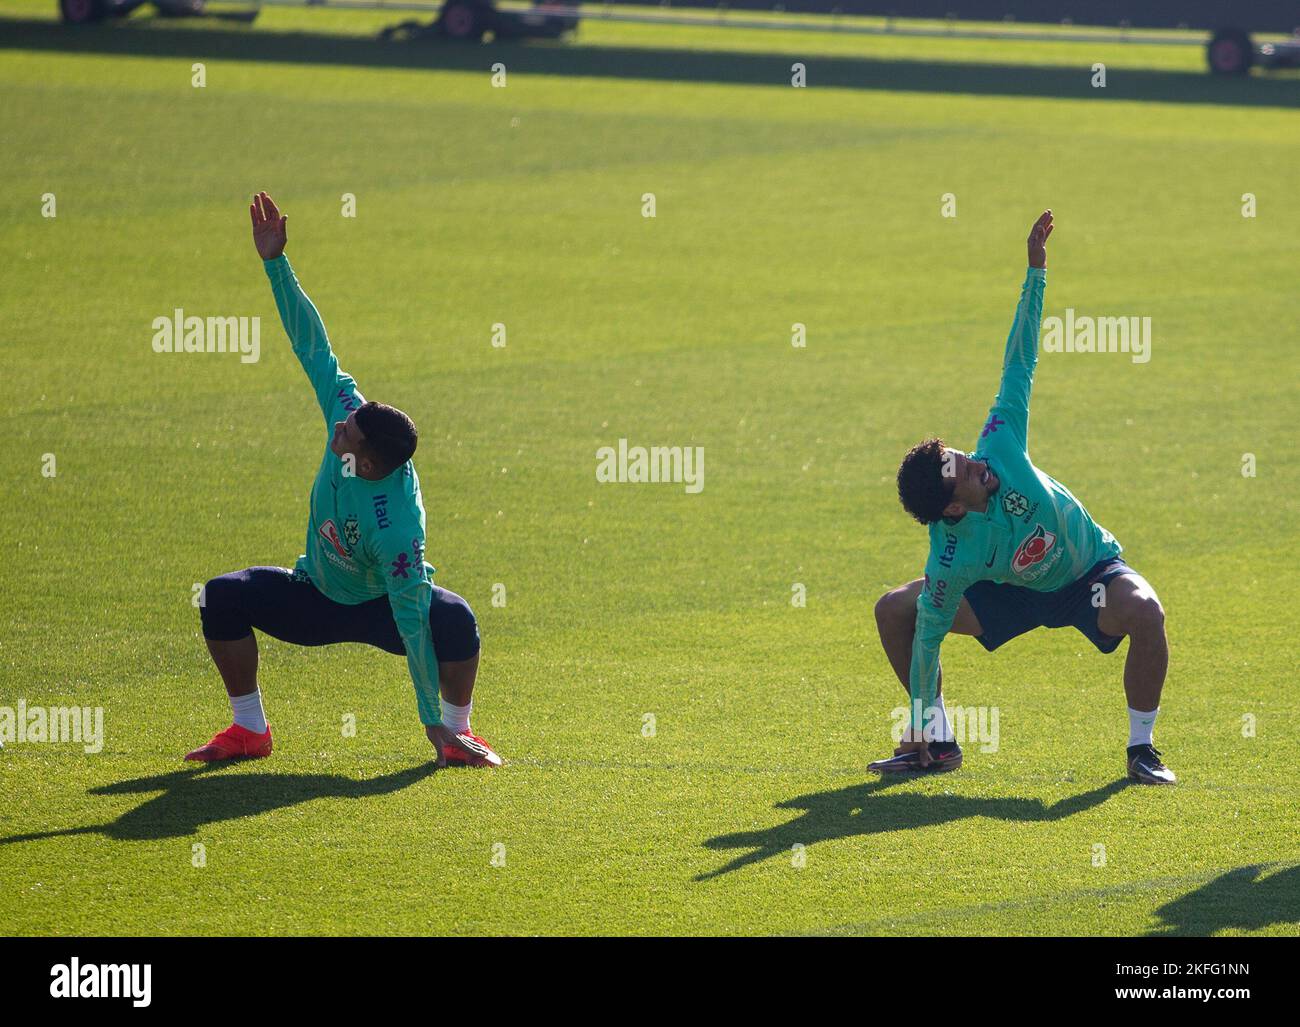 Turin, Italy. 18th Nov, 2022. Marquinhos of Brazil and Thiago Silva of Brazil during Brazil National football team trainings before the finale stage of the World Cup 2022 in Qatar, at Juventus Training Center, 18 November 2022, Turin, Italy. Photo Nderim Kaceli Credit: Independent Photo Agency/Alamy Live News Stock Photo